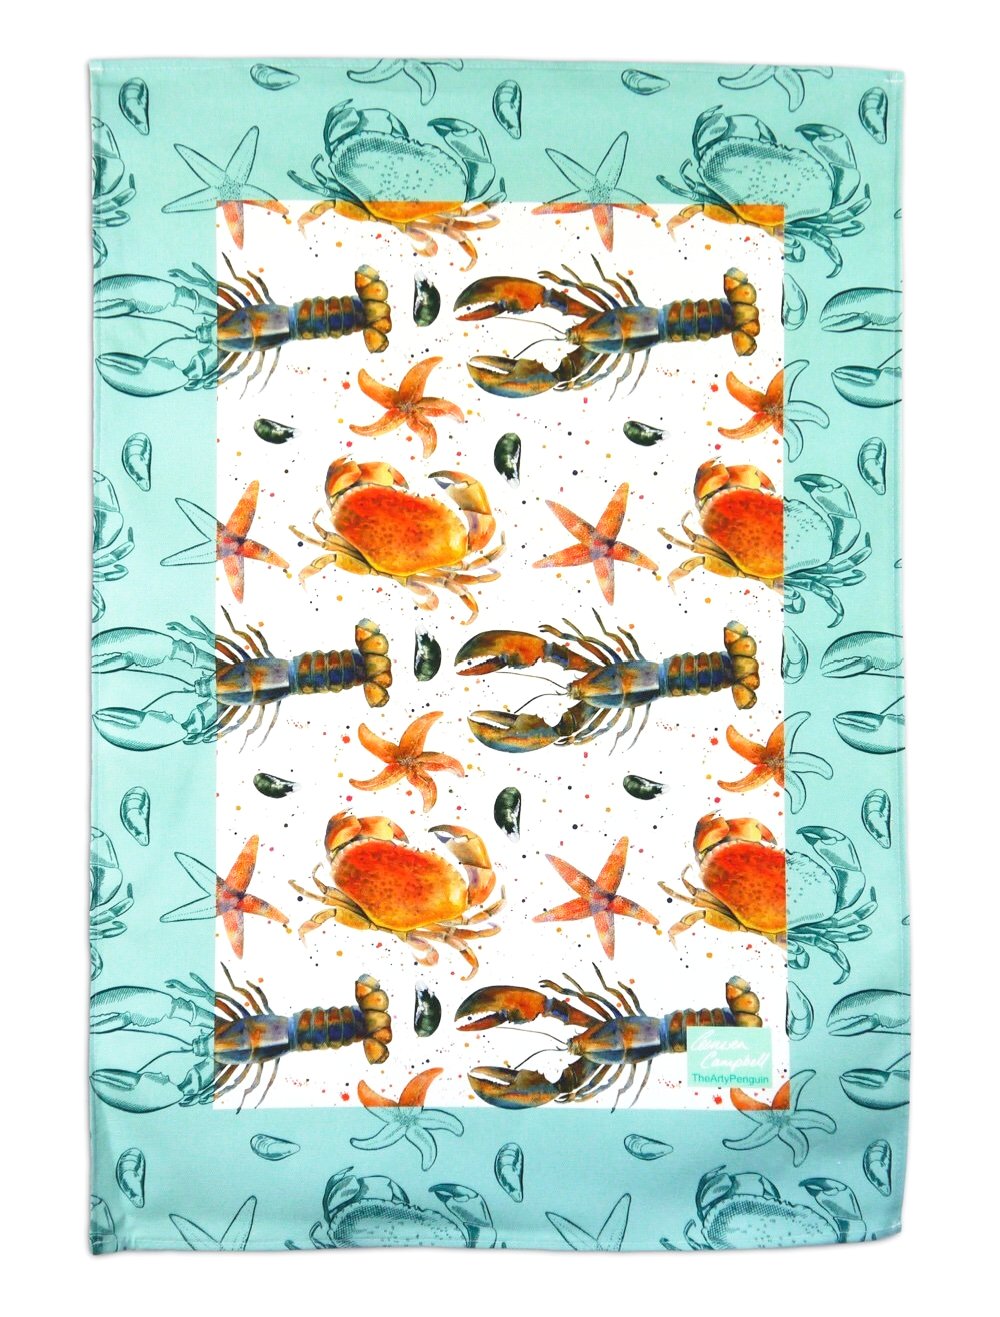 lobster crab starfish mussel gift tea towel by Ceinwen Campbell and The Arty Penguin 